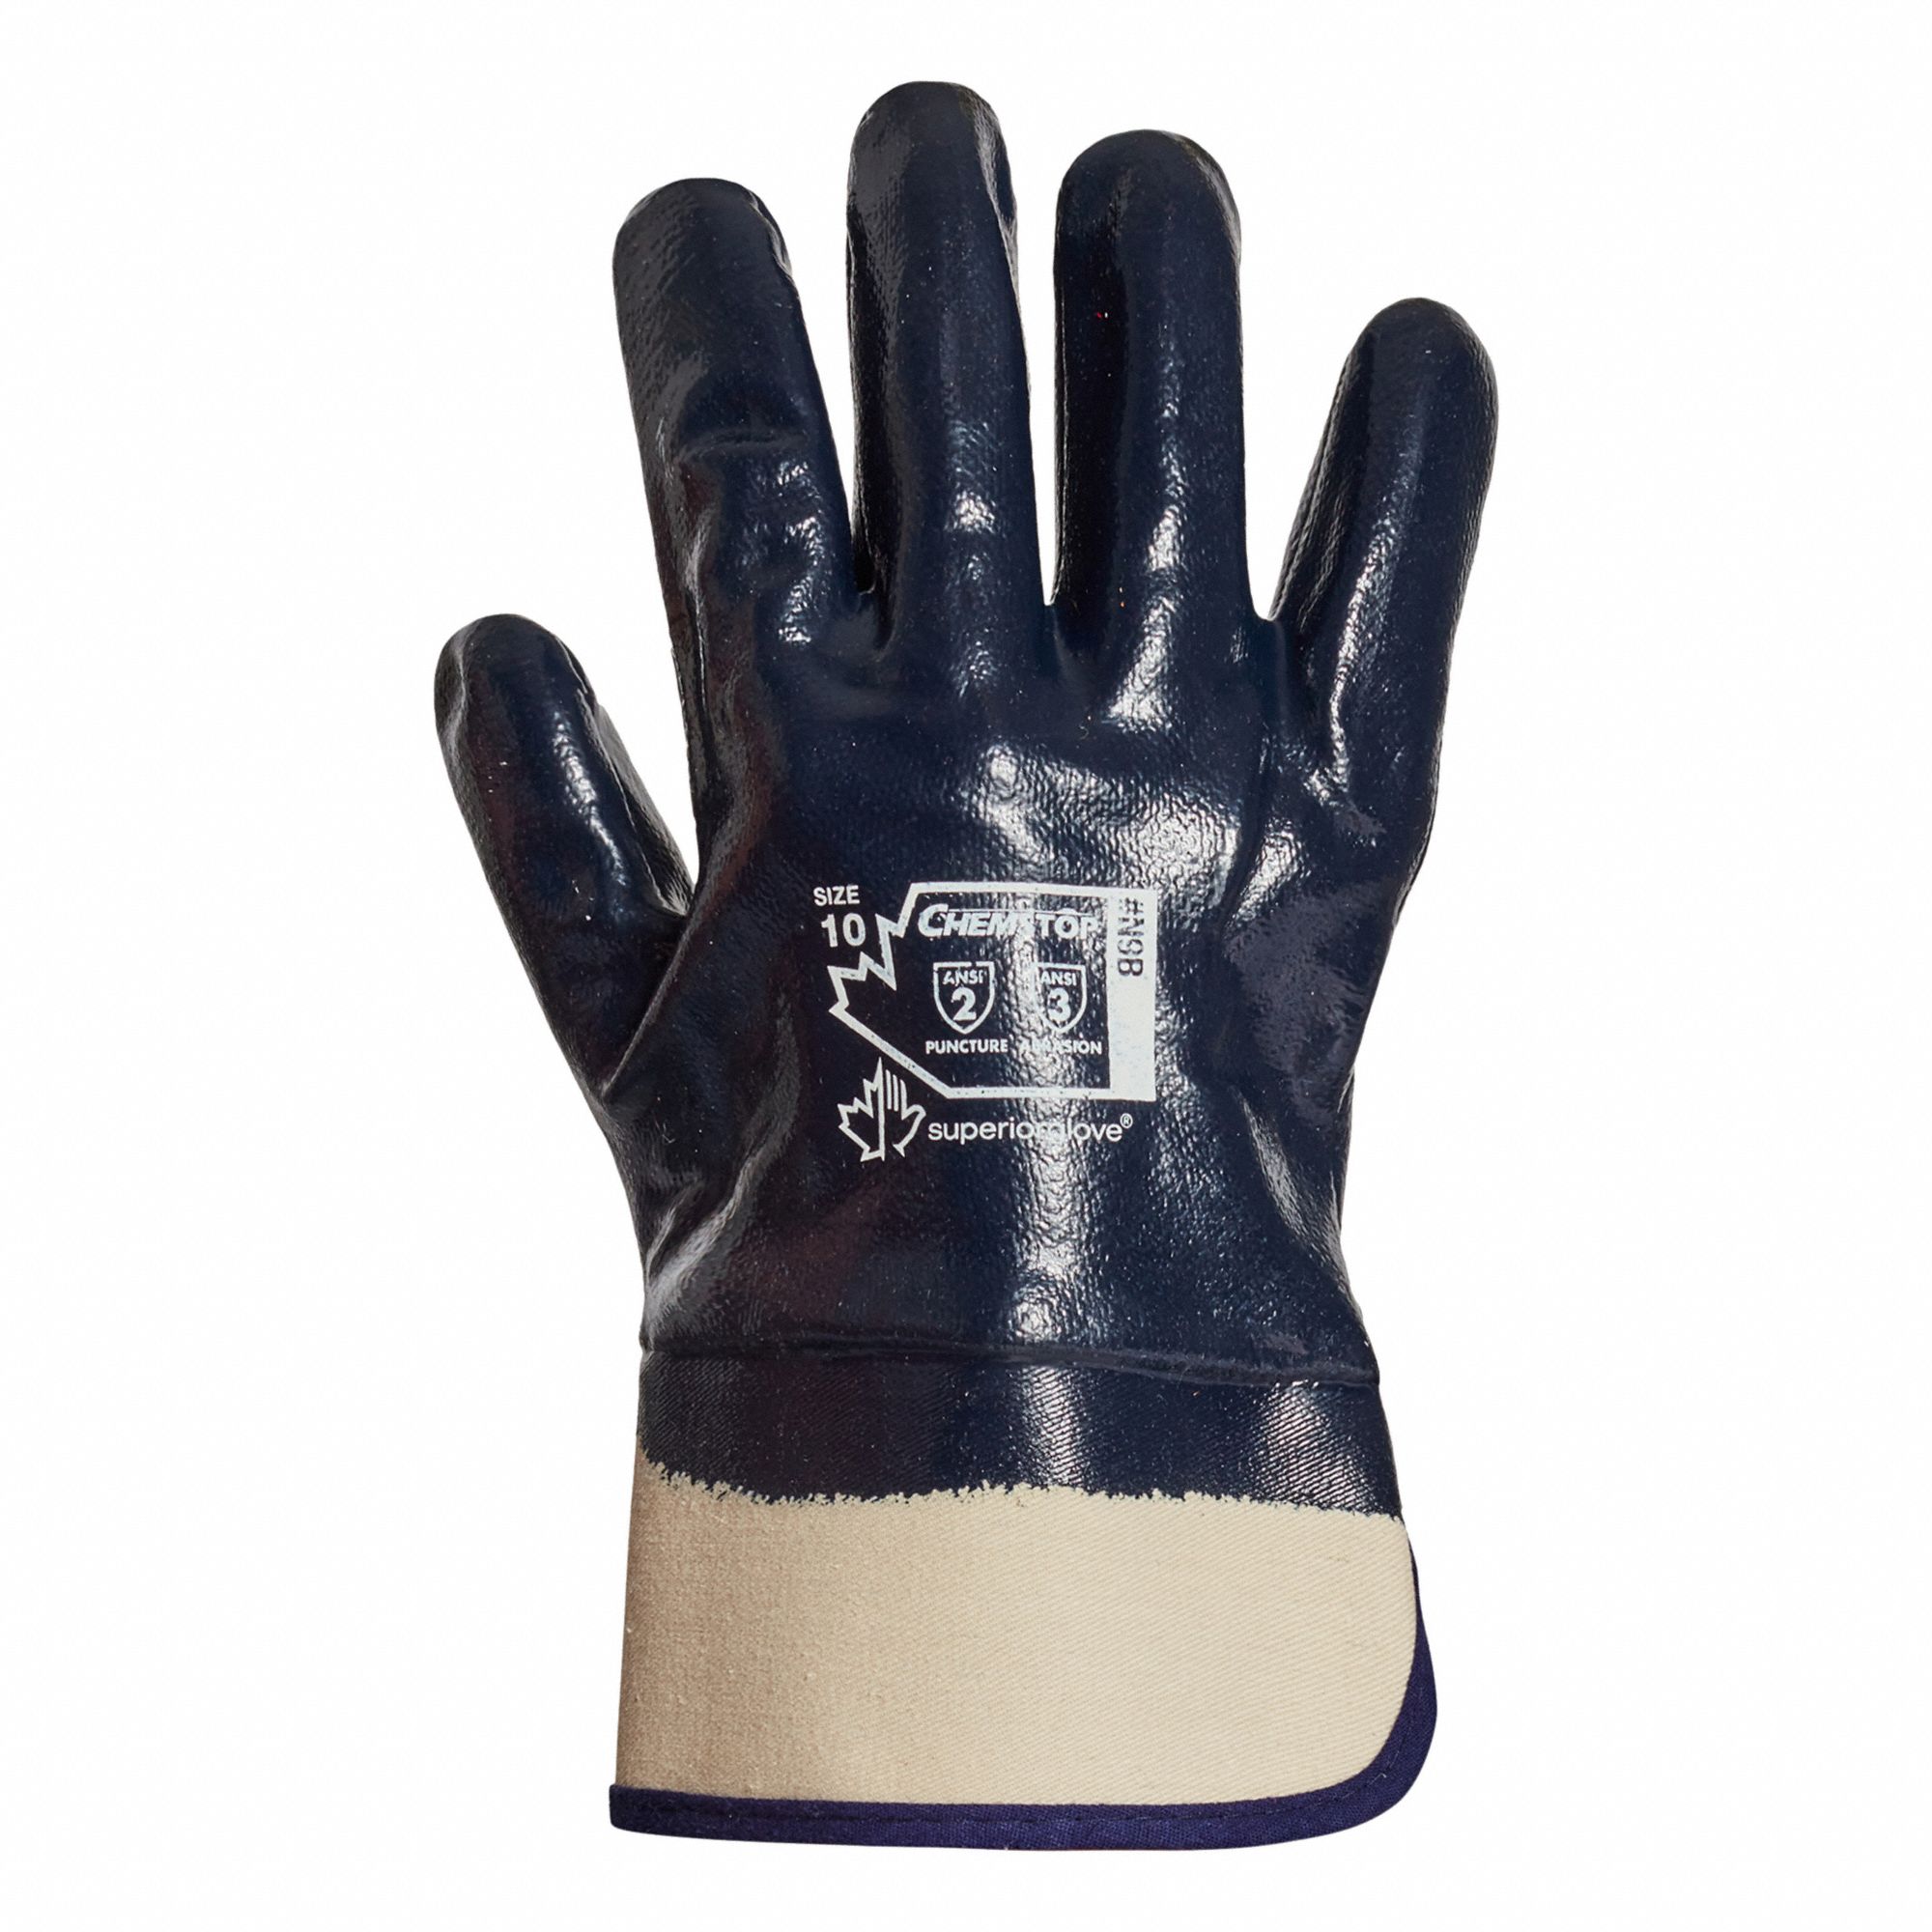 SUPERIOR GLOVE CHEMSTOP N9B PUNCTURE-RESISTANT GLOVES, BL, COTTON,  ANSI/ISEA ABRASION 5/PUNCTURE 2 - Knit General Purpose Gloves - SUGN9B